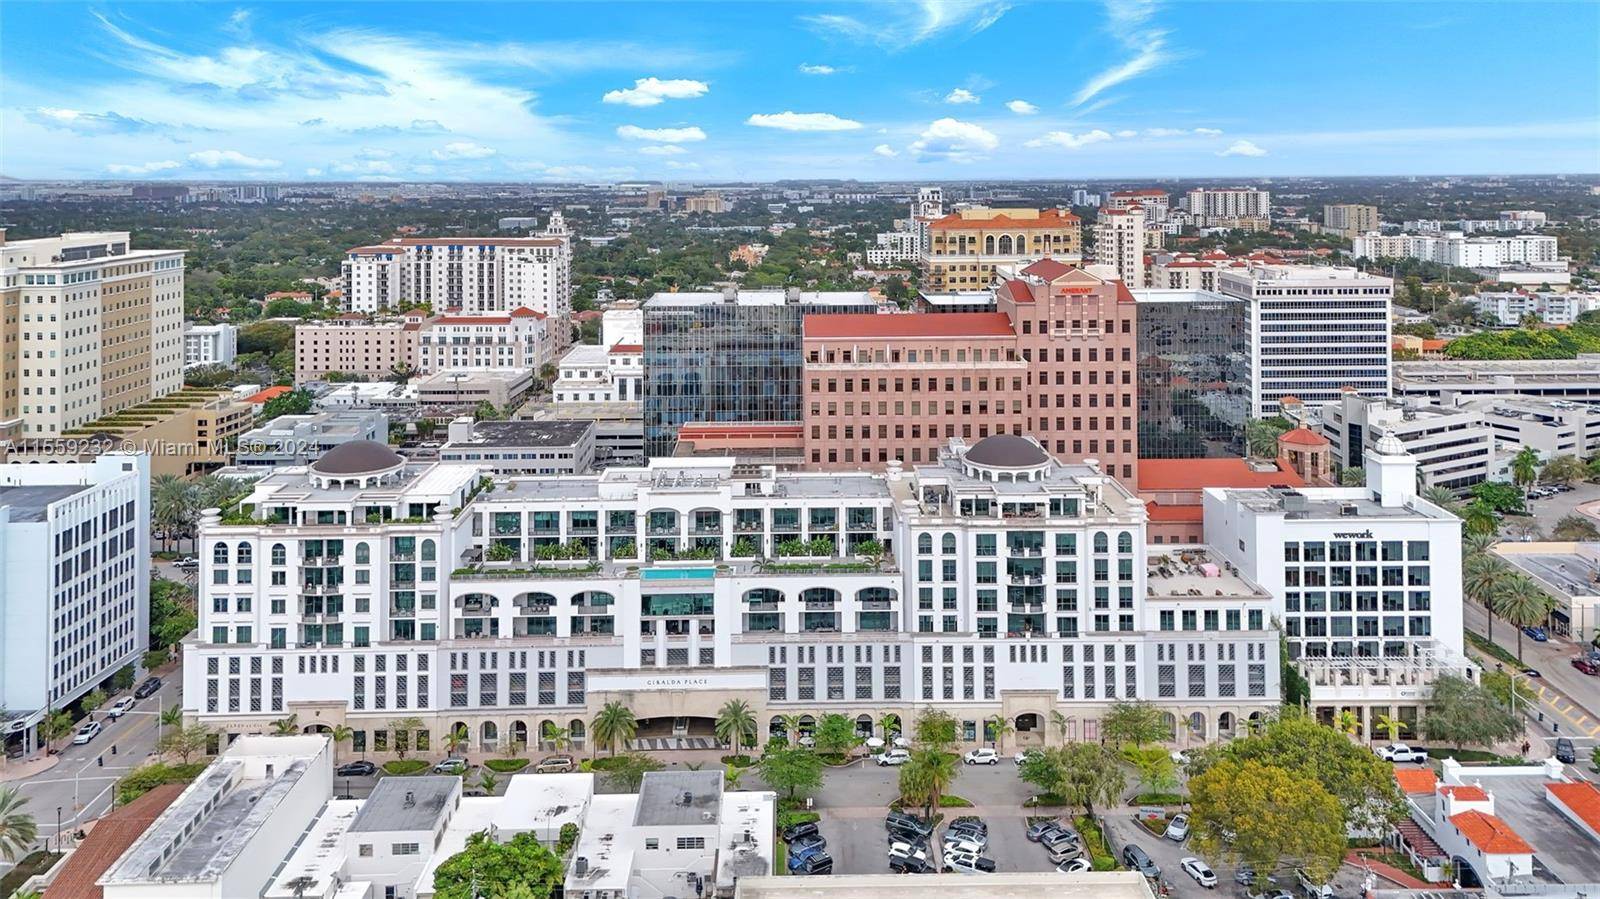 Discover luxurious living in the heart of Coral Gables with these two unique condos seamlessly combined into one phenomenal space 4, 986 SF.